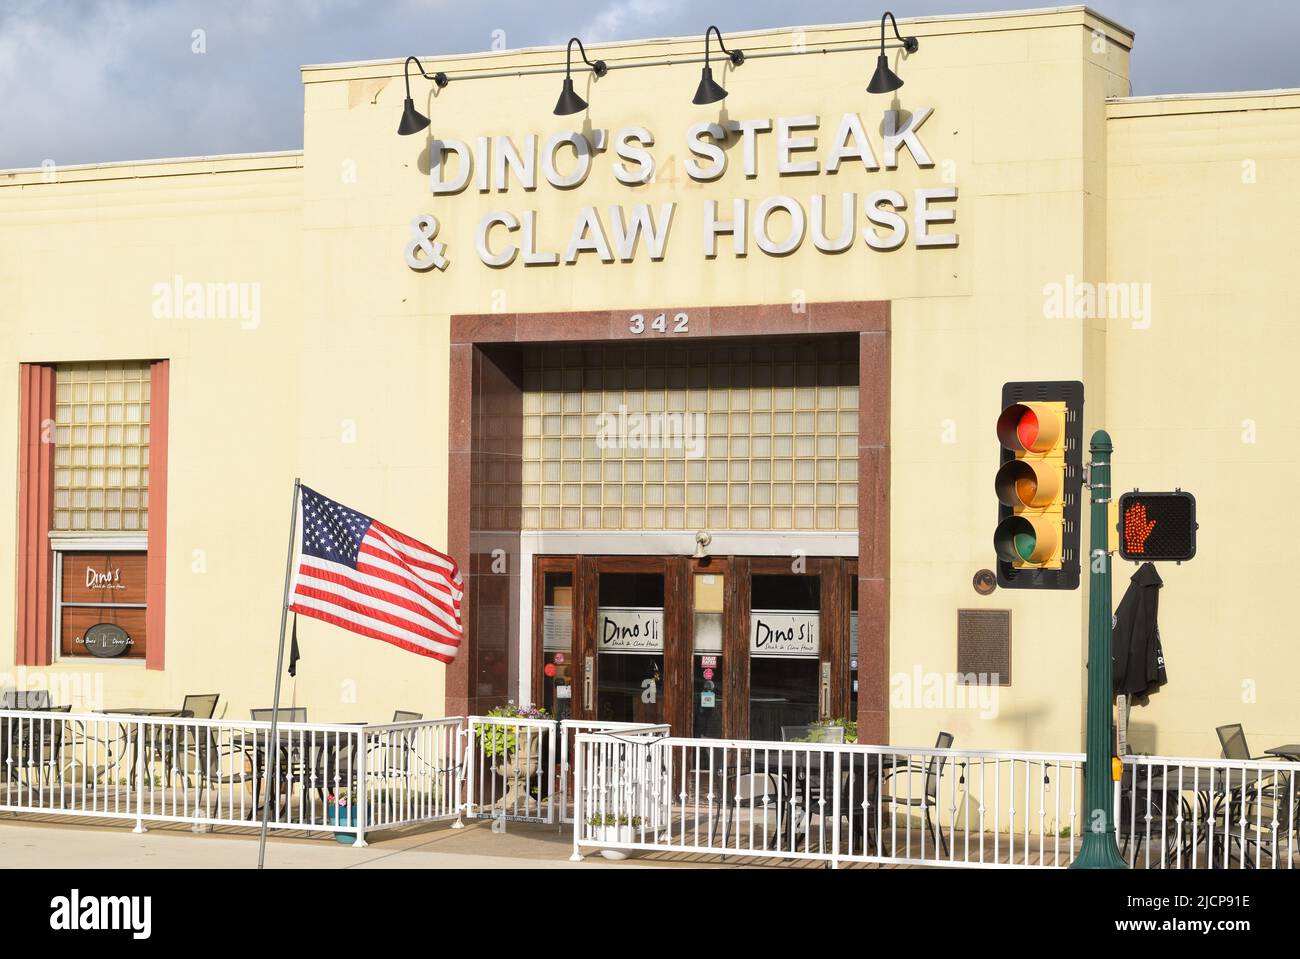 An American flag blows in the wind outside of Dino's Steak & Claw House in historical downtown Grapevine, Texas Stock Photo